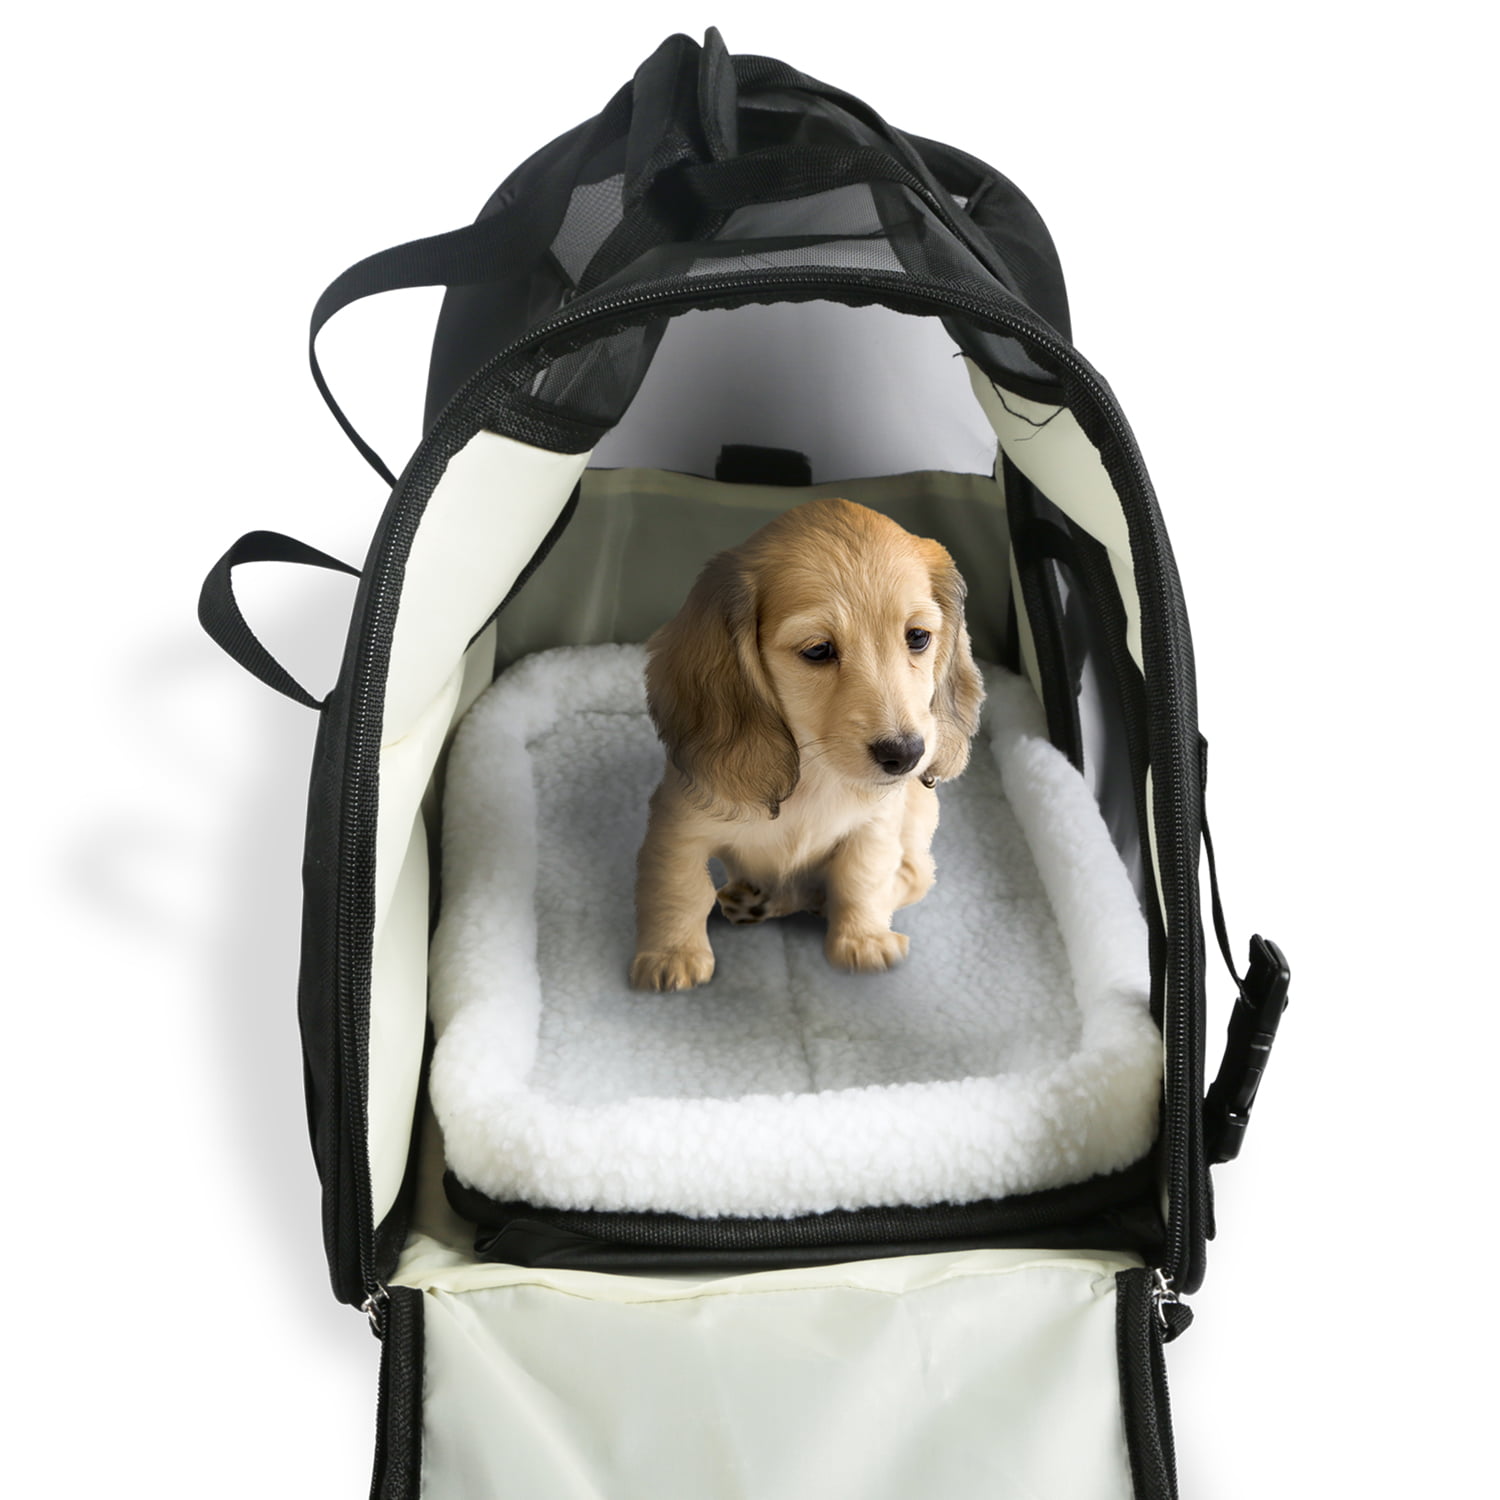 airline approved pet carrier walmart